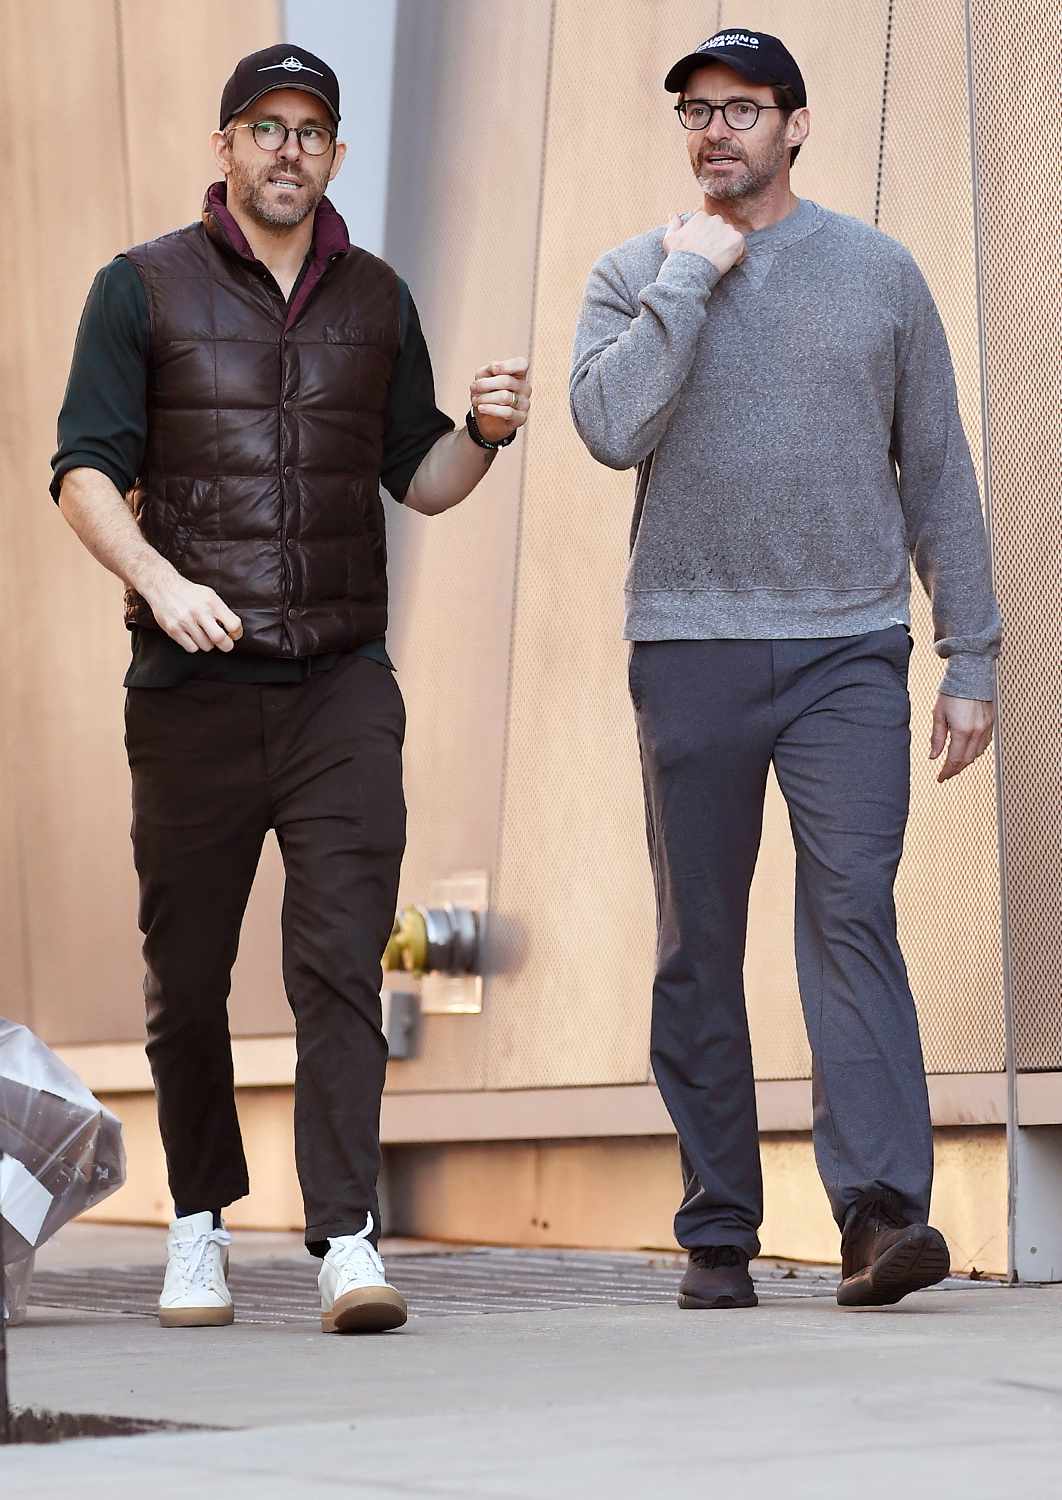 Ryan Reynolds and his Best Friend Hugh Jackman are photographed spending Christmas Eve together by talking a morning walk in New York City this morning.